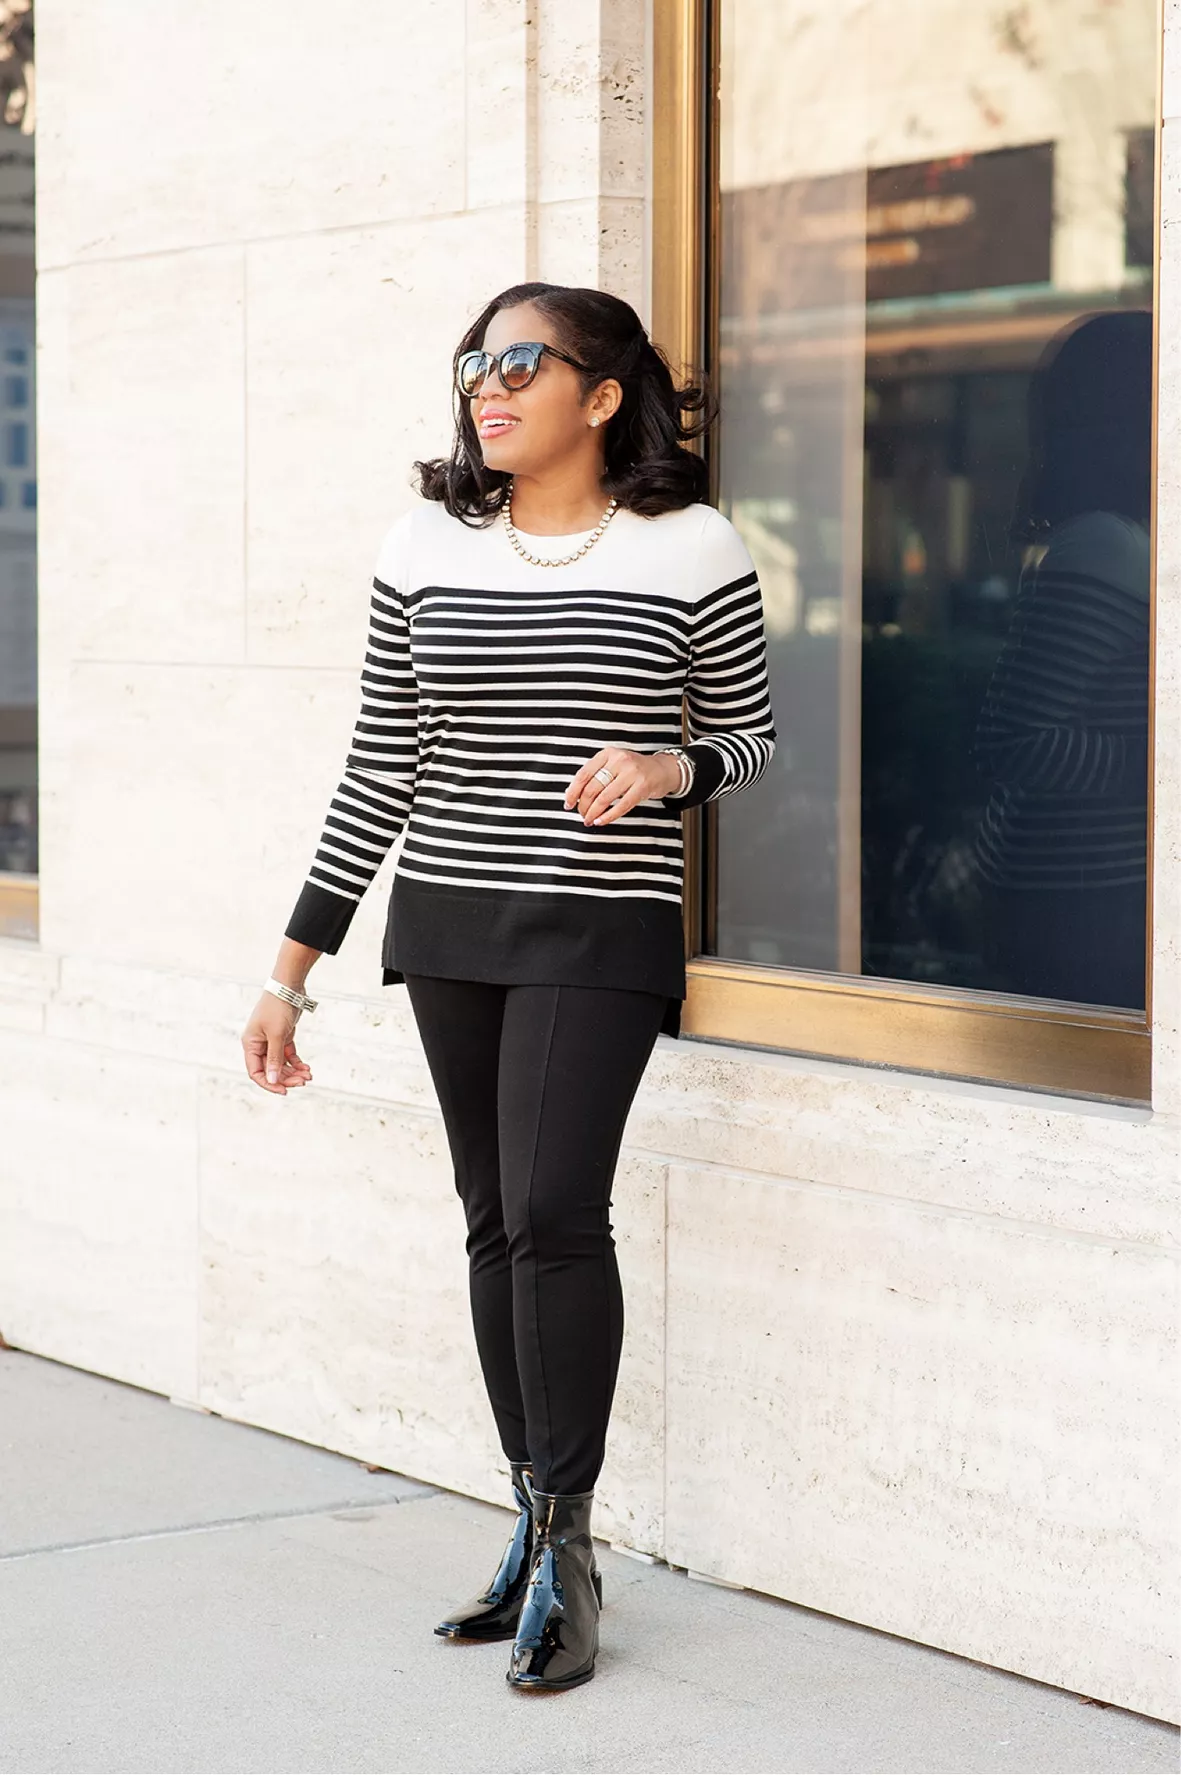 How to Style a Black and White Striped Sweater with Leggings